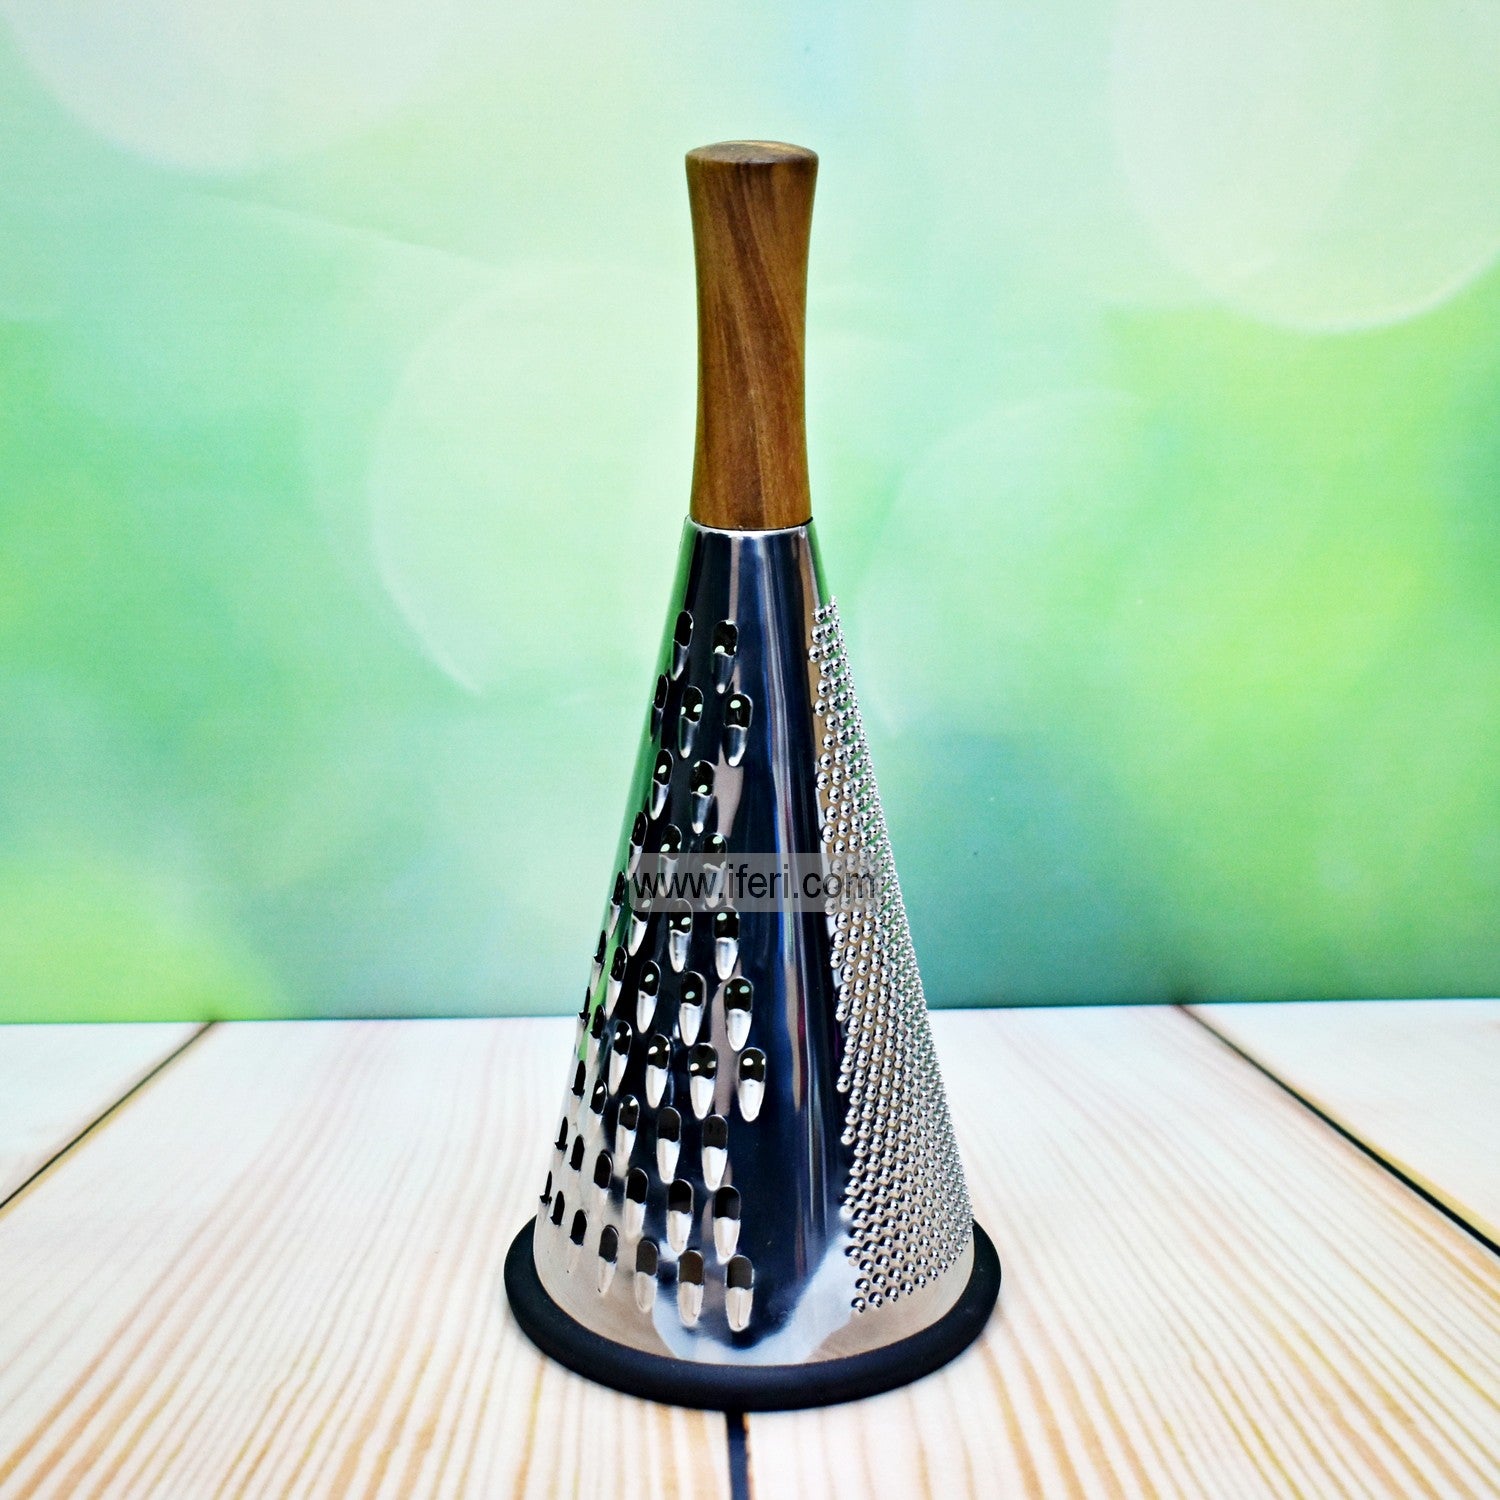 3 Sided Multipurpose Grater with Wooden Handle EB24551